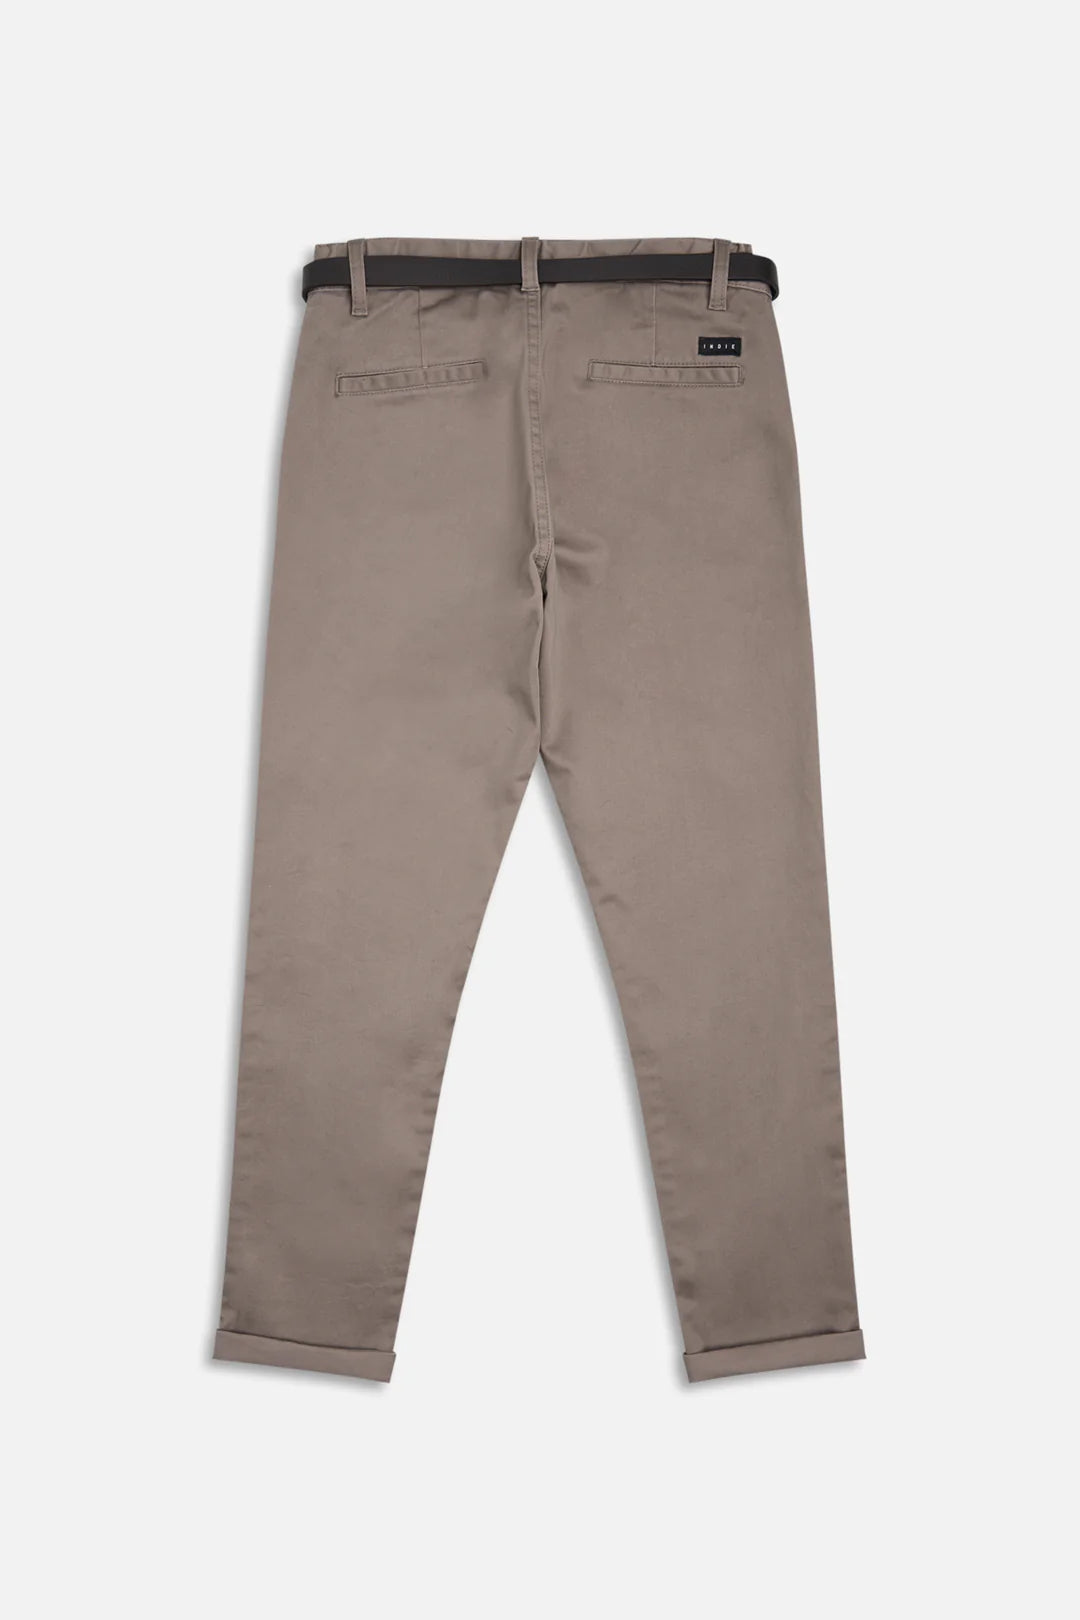 Indie Kids Cuba Stretch Chino - Clay (8-16 Years)